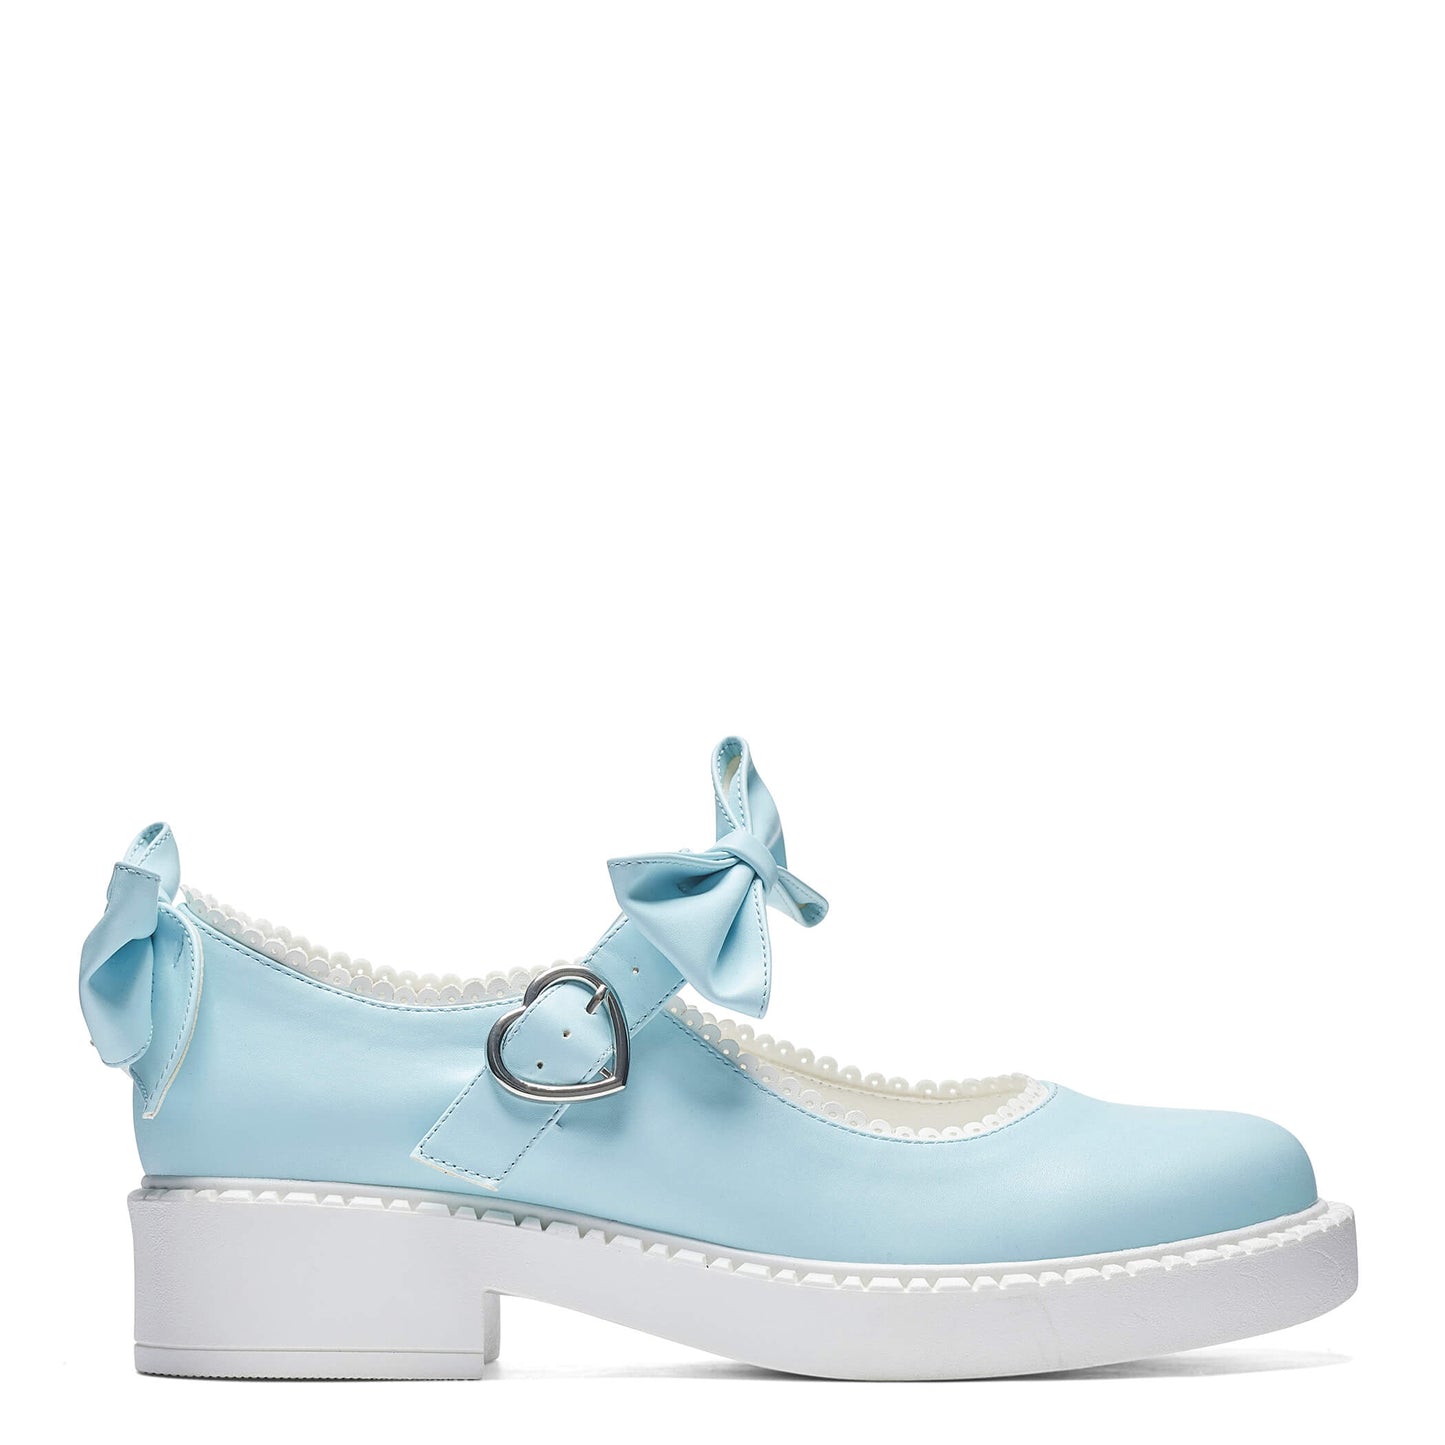 Fairy Lace Doily Mary Janes - Baby Blue - Mary Janes - KOI Footwear - Blue - Side View